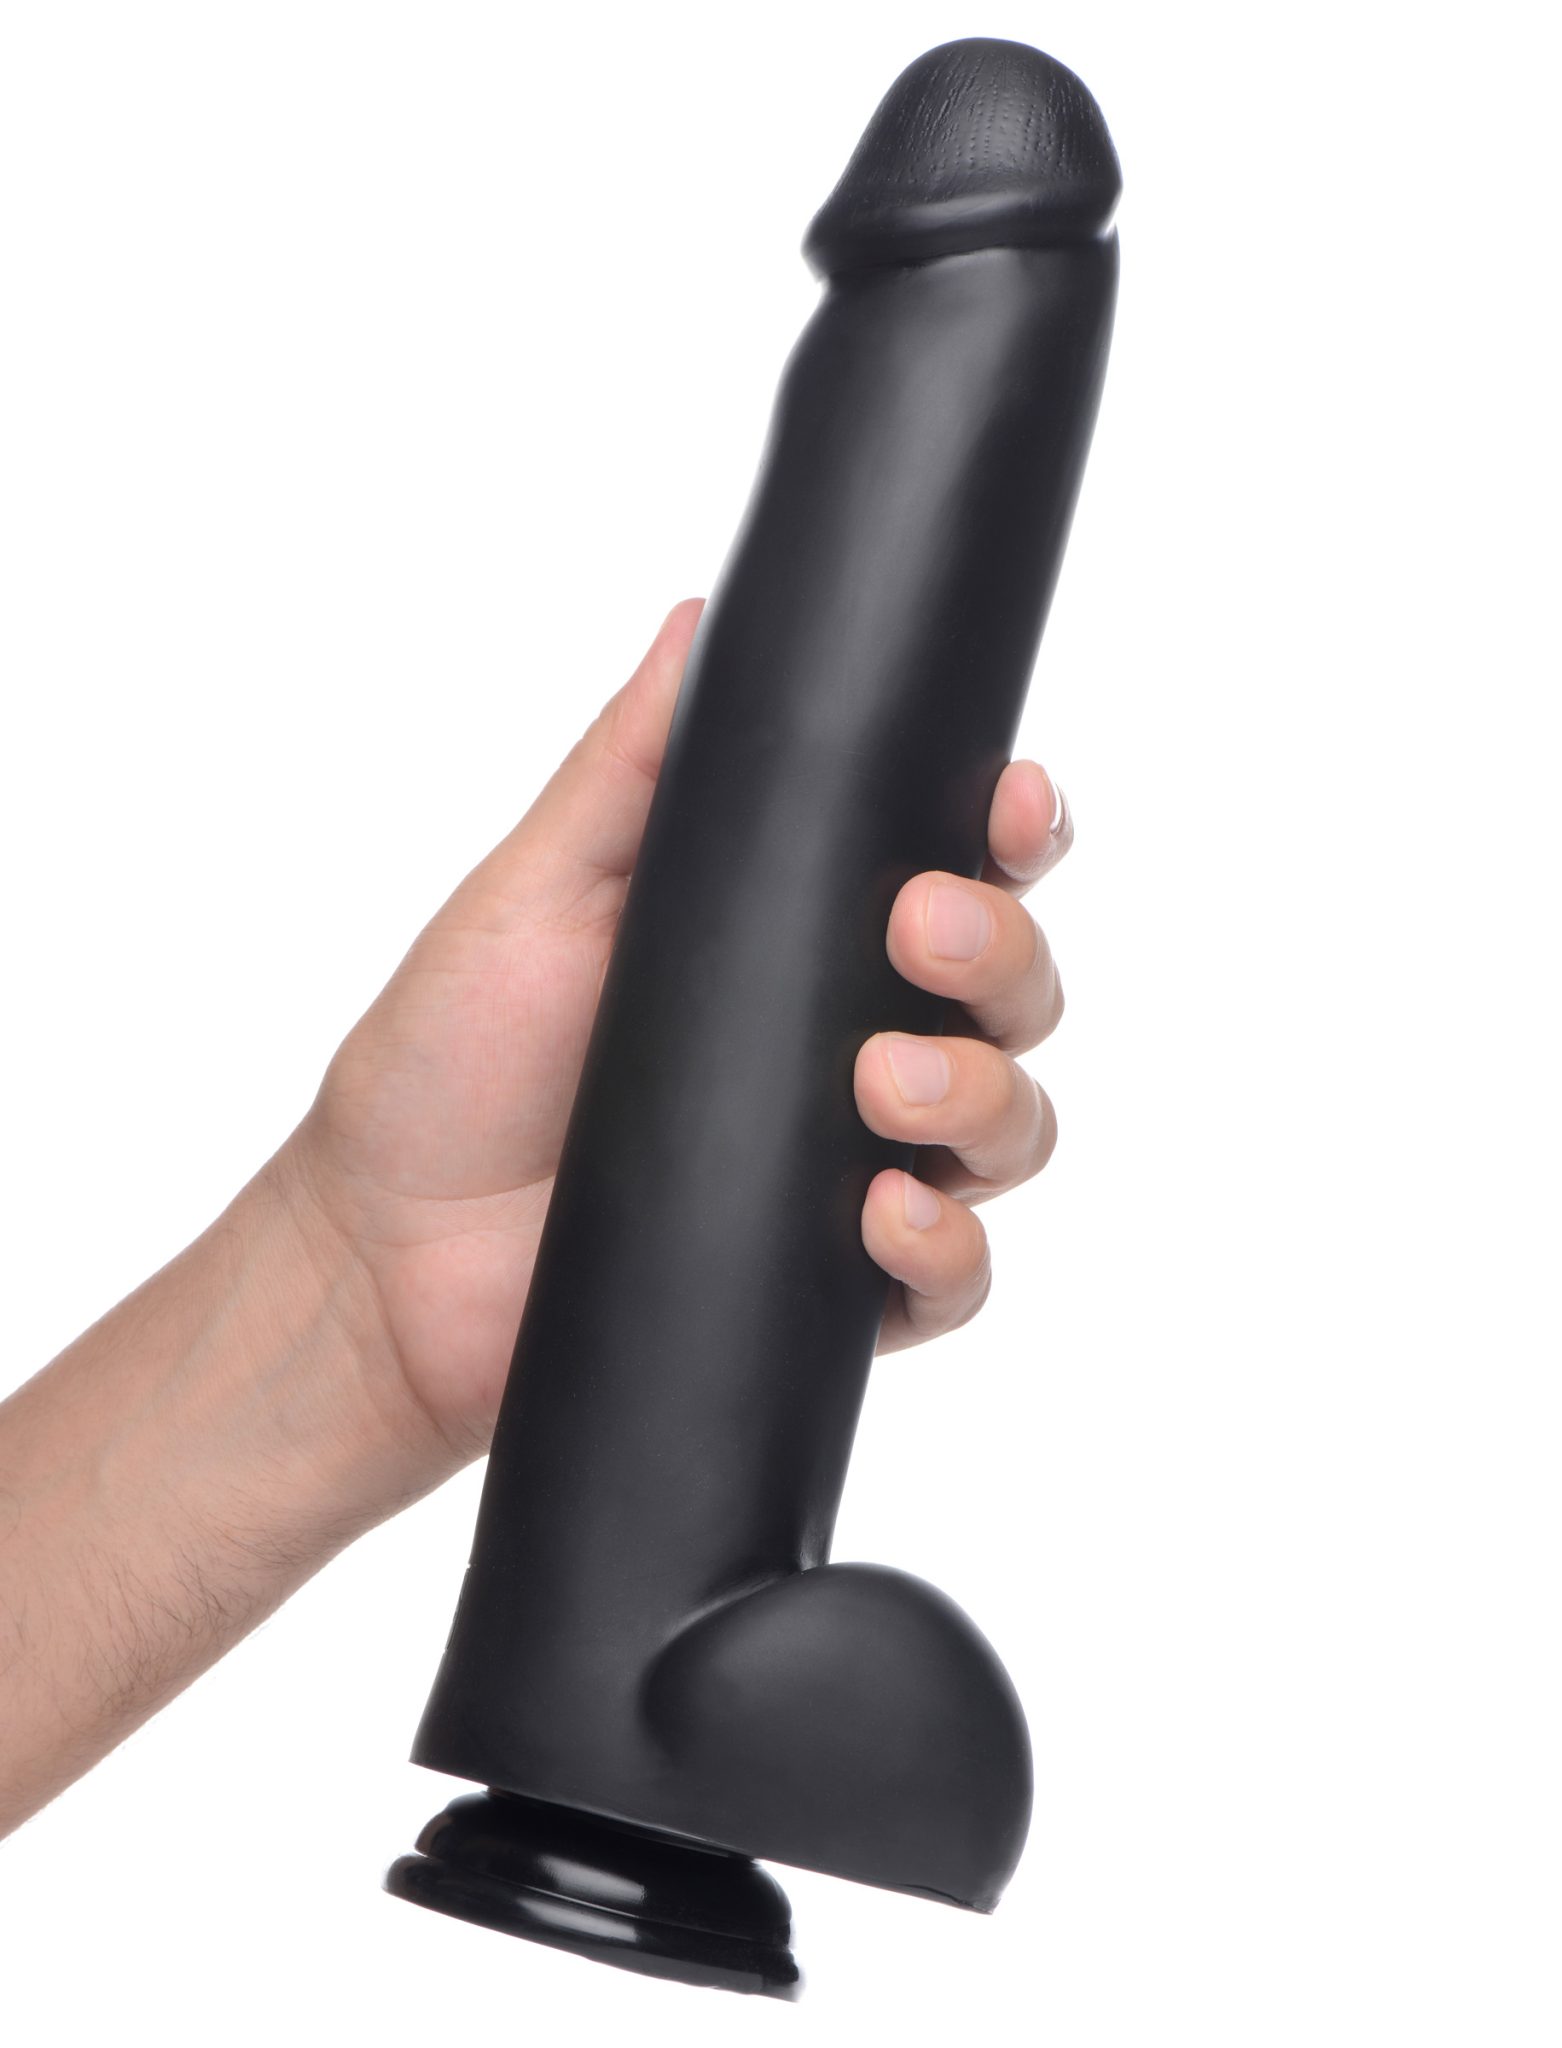 The Master Suction Cup Dildo – Black